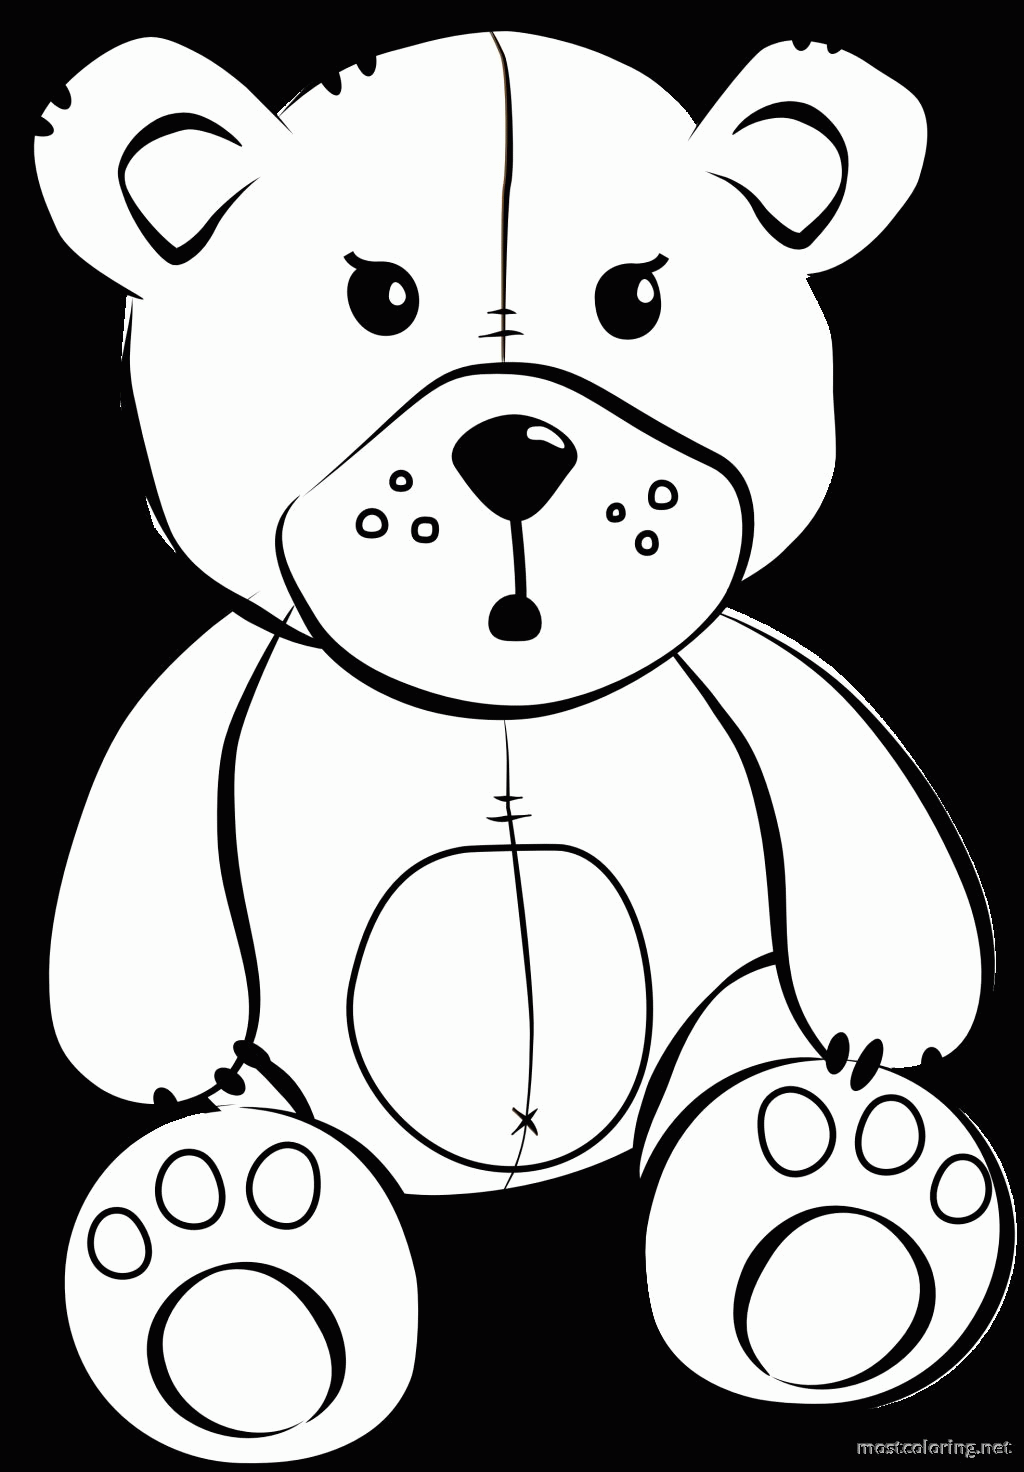 Stuffed Animal Coloring Pages - Coloring Home